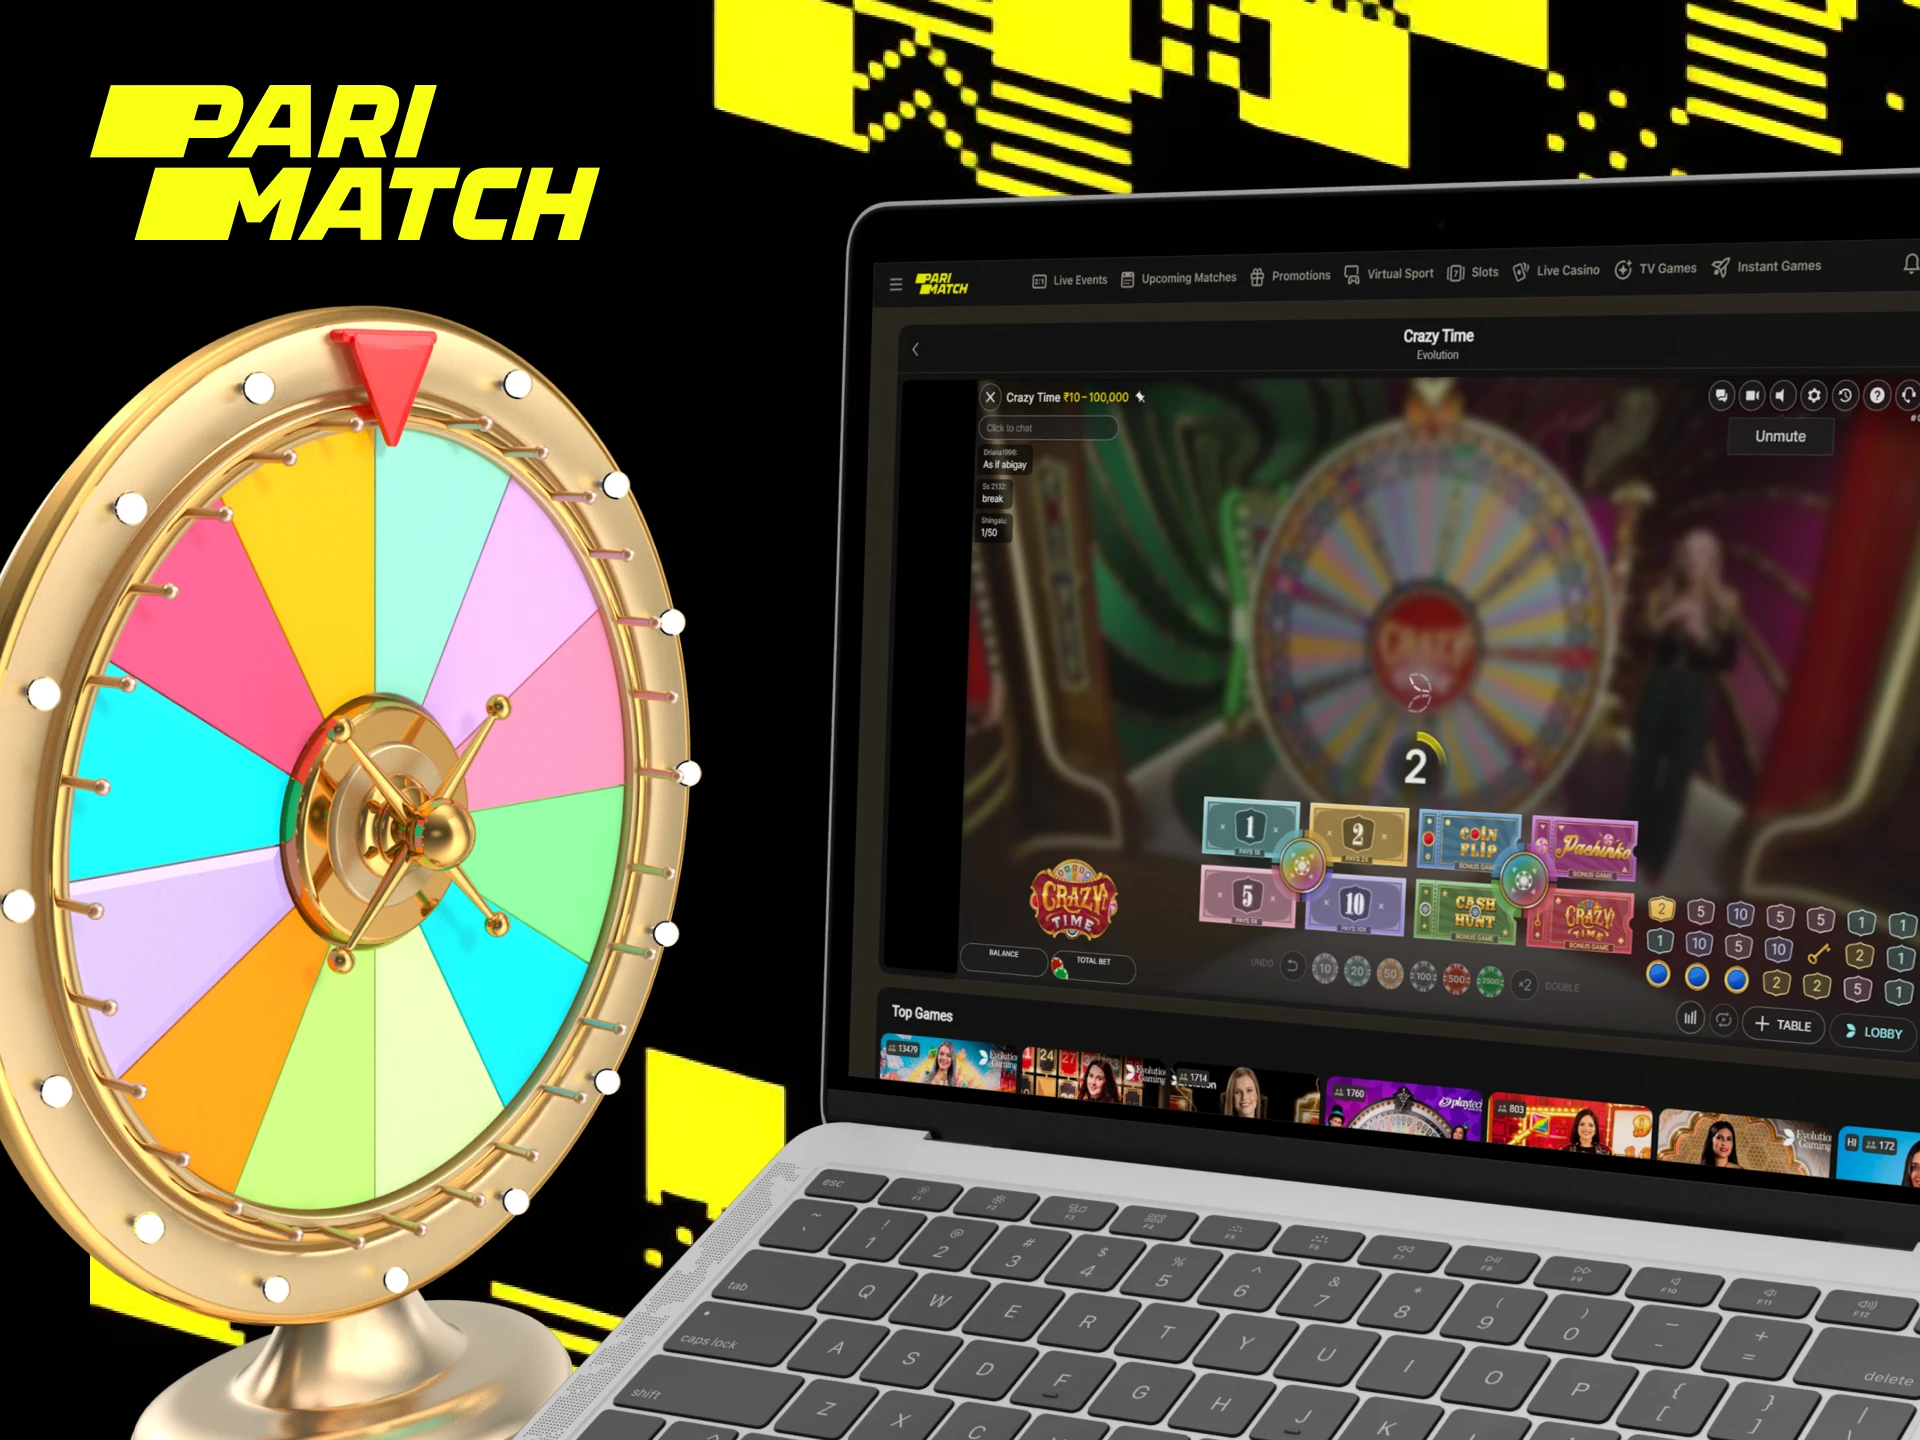 Crazy Time Parimatch is an online wheel of fortune game with lots of bonuses.